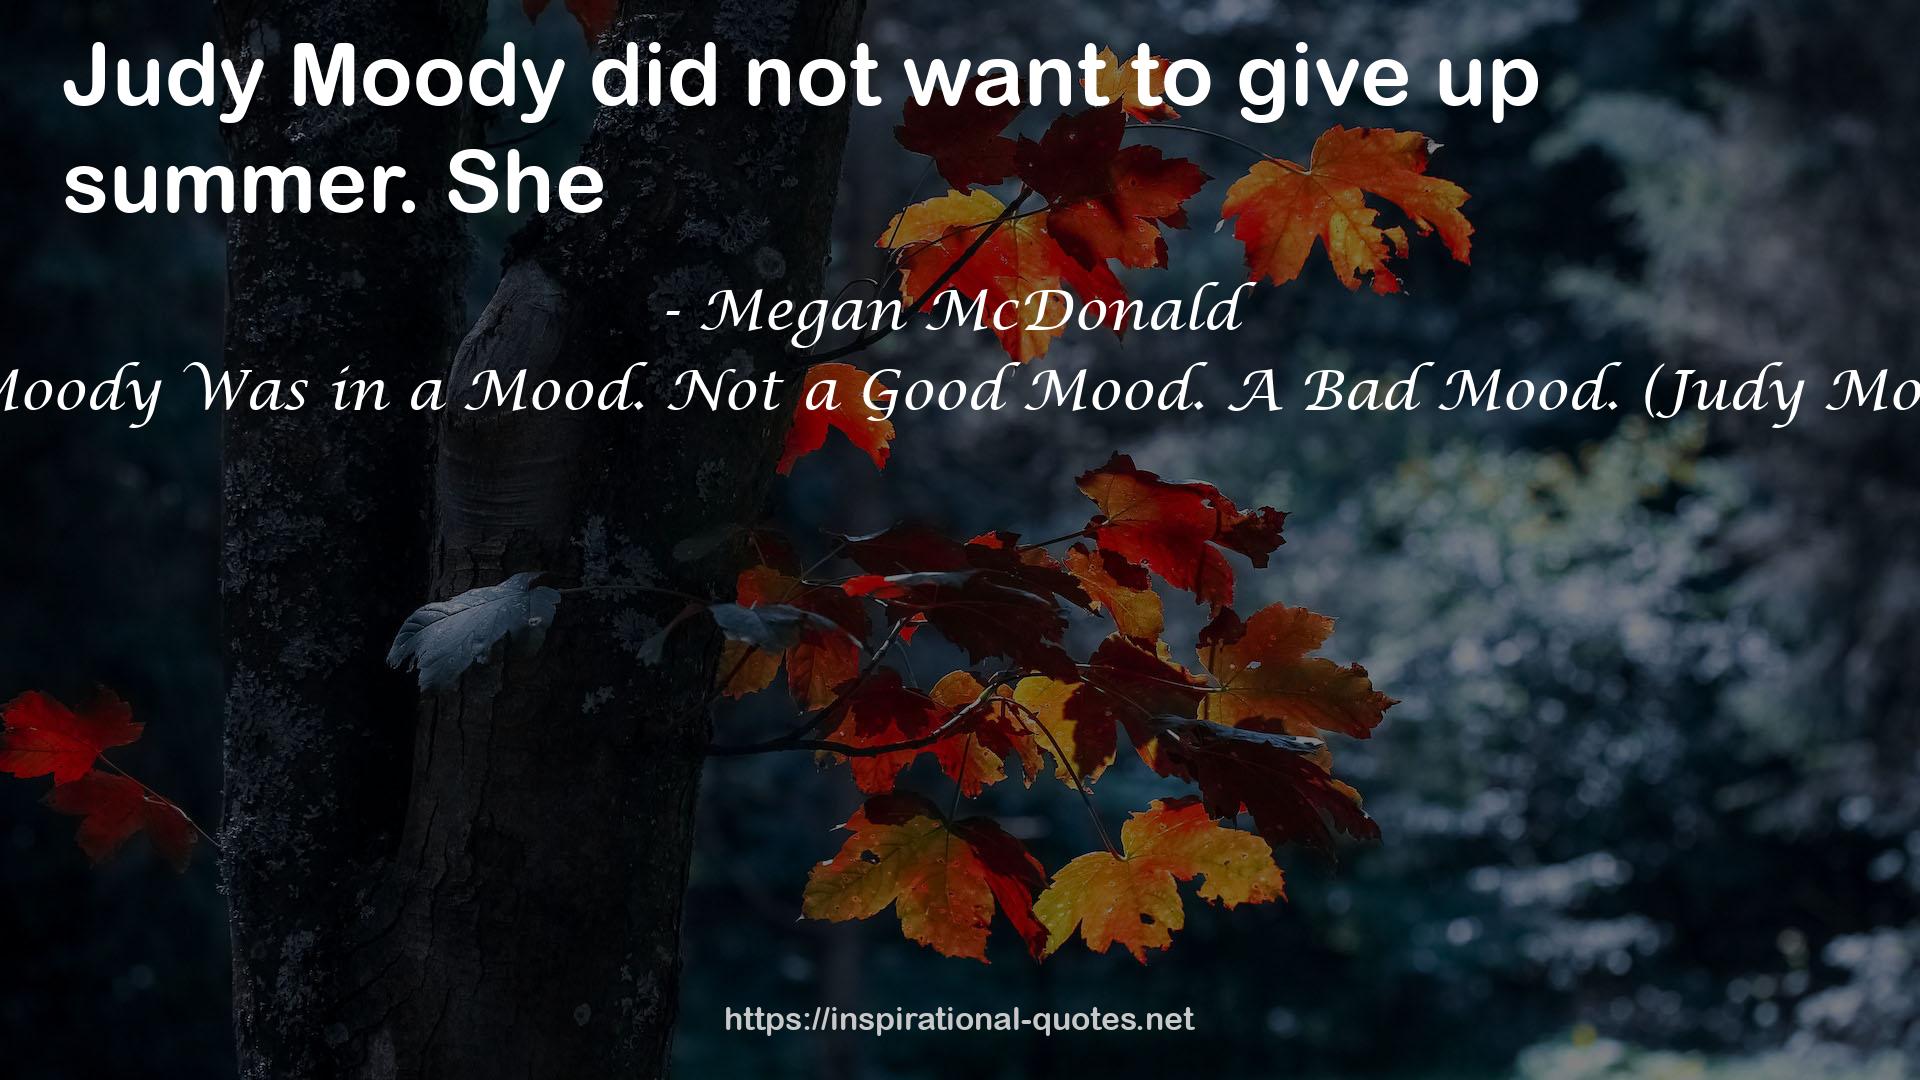 Judy Moody Was in a Mood. Not a Good Mood. A Bad Mood. (Judy Moody #1) QUOTES